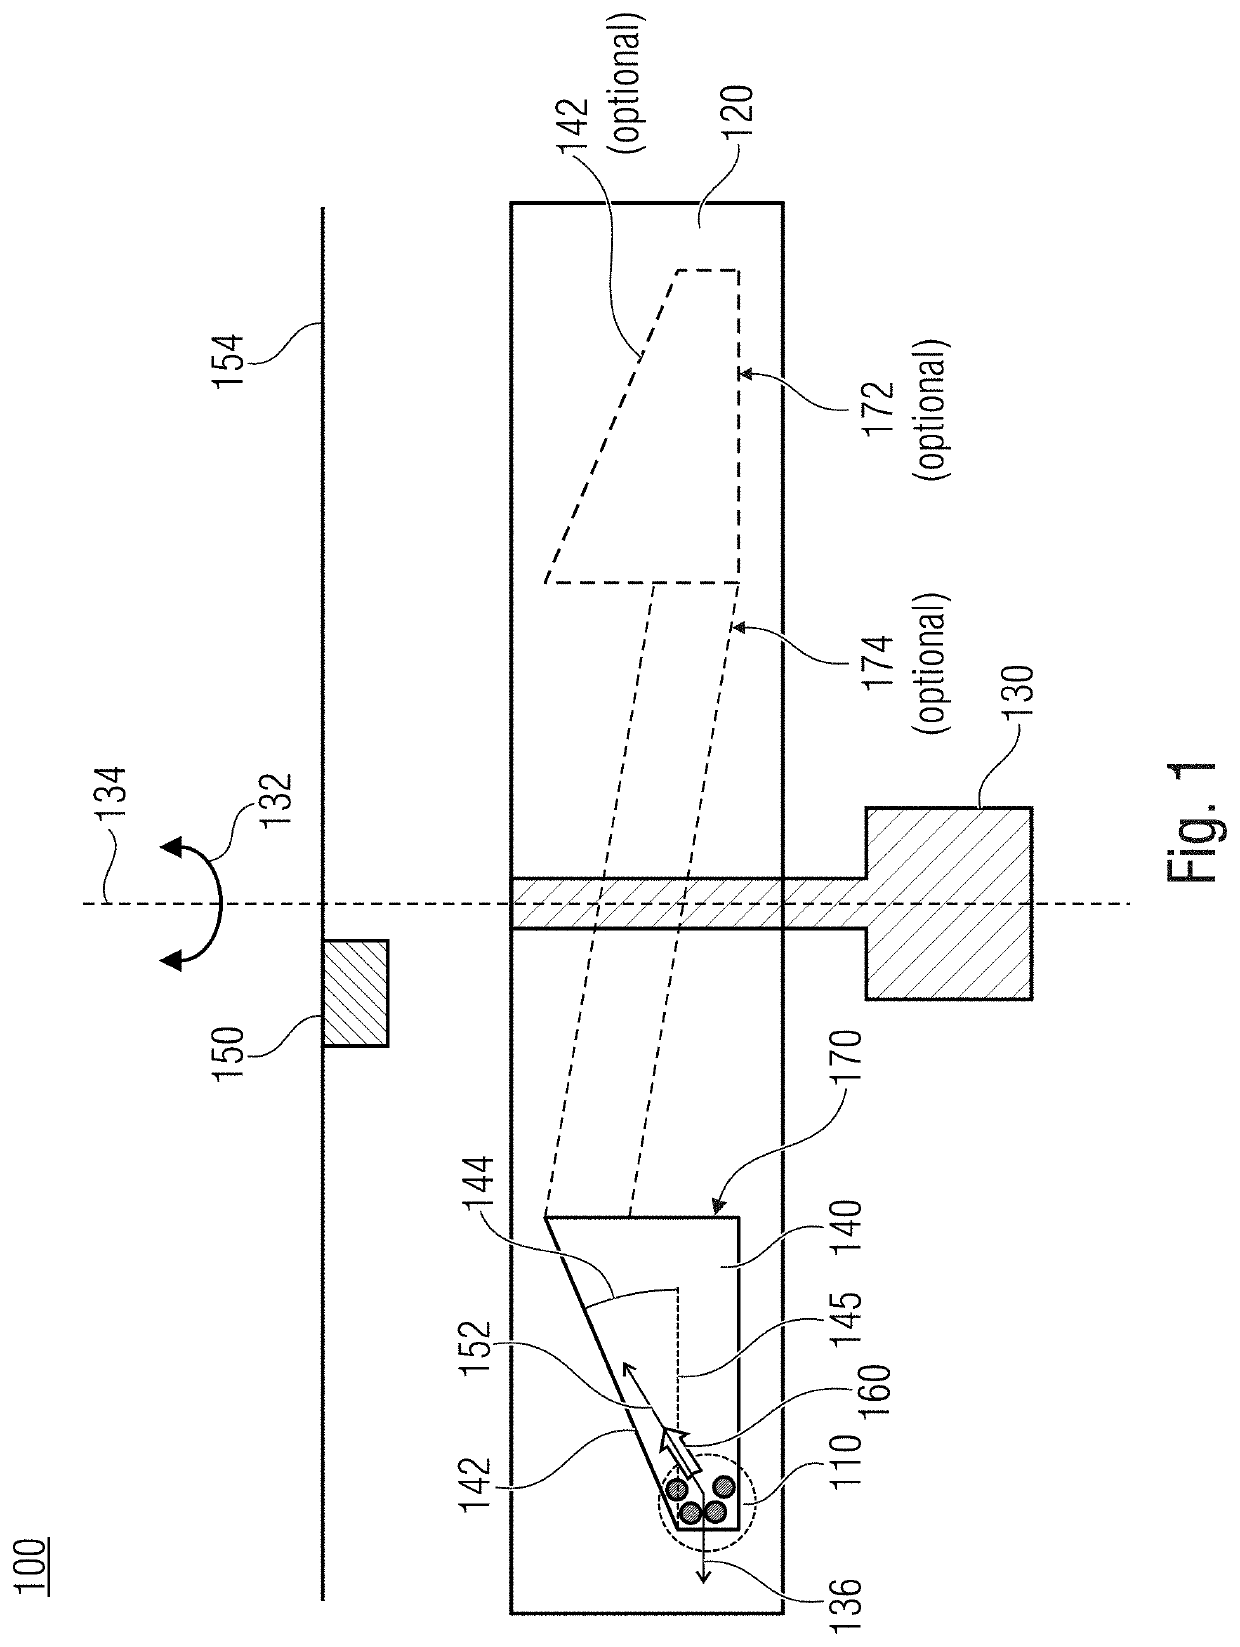 Apparatus and method for transporting magnetic particles